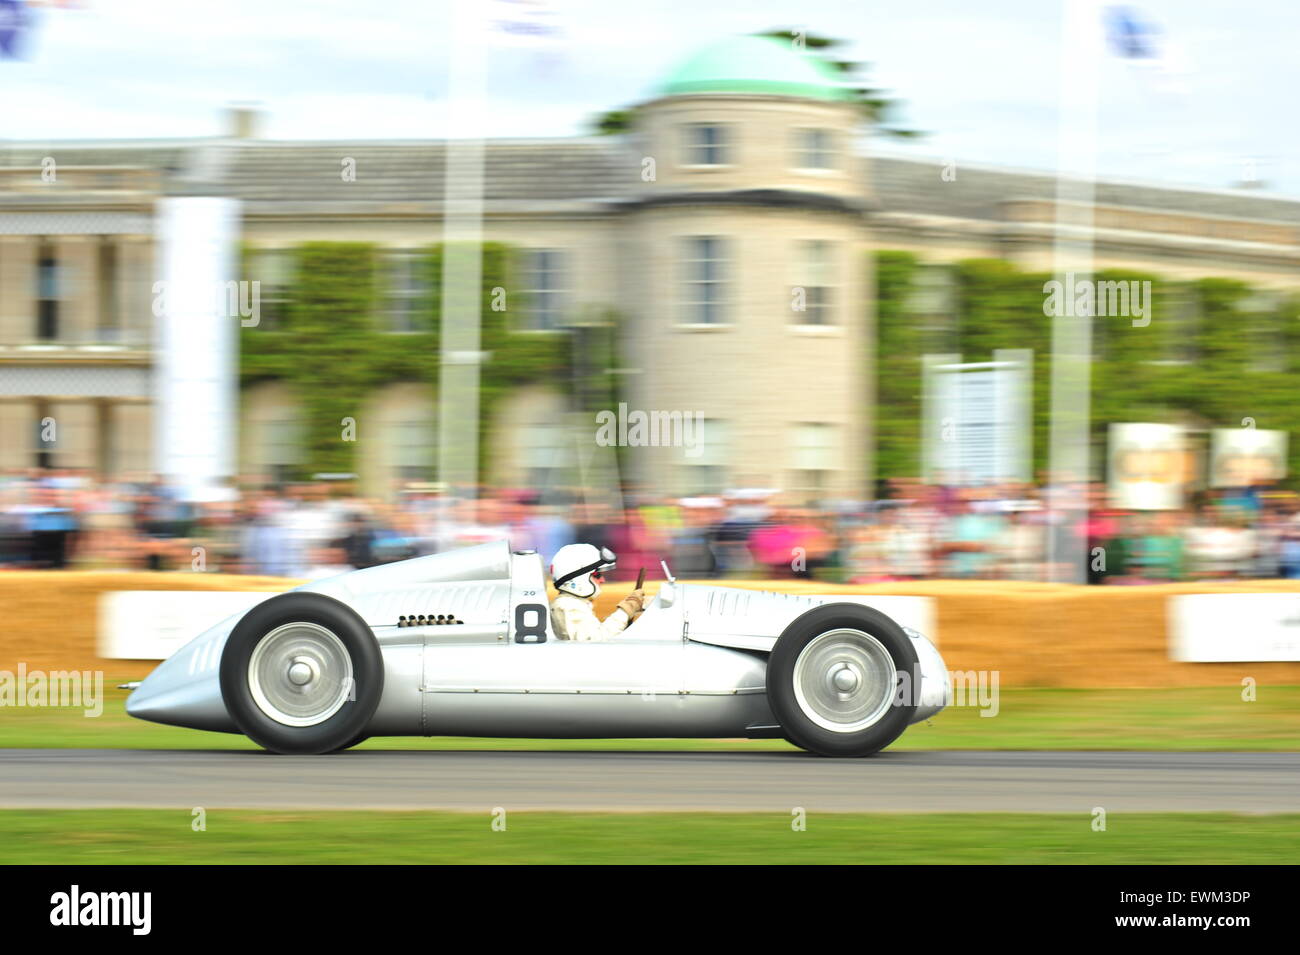 Goodwood, West Sussex, UK. Sunday 28 June 2015 The final day of action at the Goodwood Festival of Speed. Racing drivers, celebrities and thousands of members of the public attended the Goodwood Festival of Speed to see modern and old racing cars and bikes in action. Stock Photo